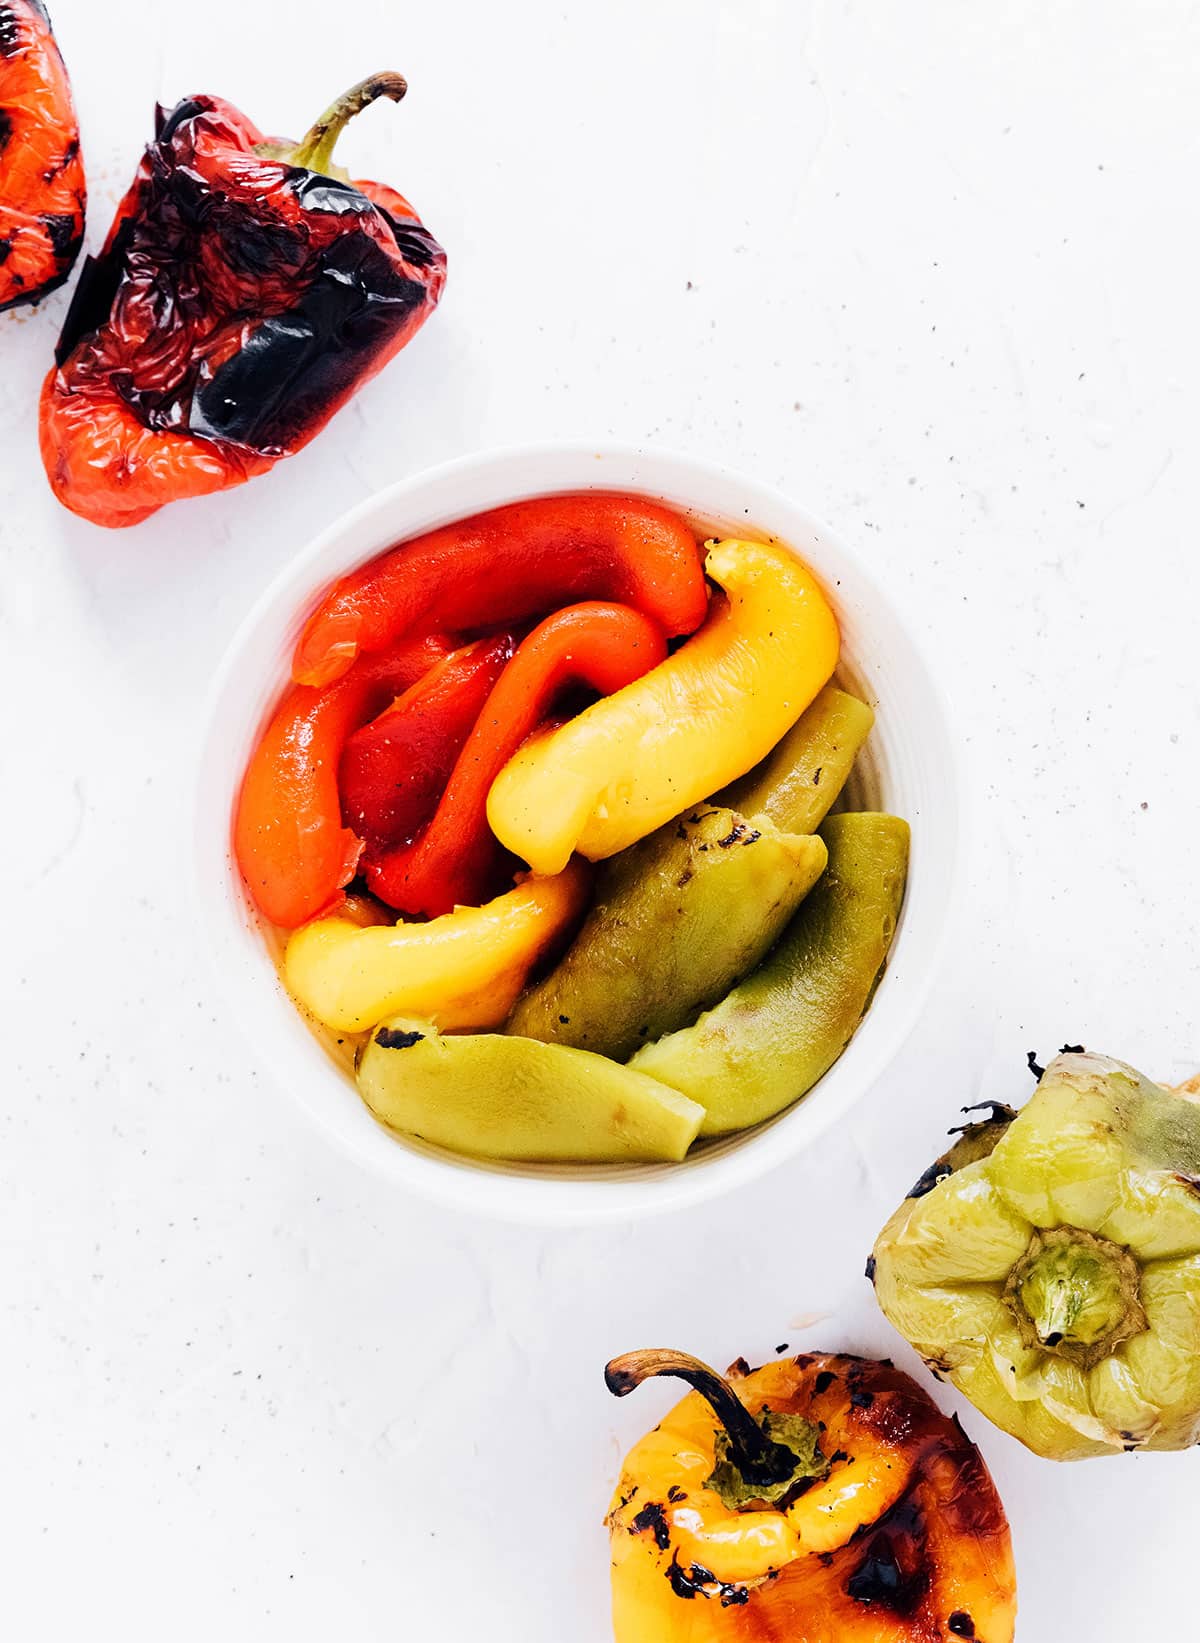 Roasted peppers in oil in a white bowl with roasted peppers next to it.